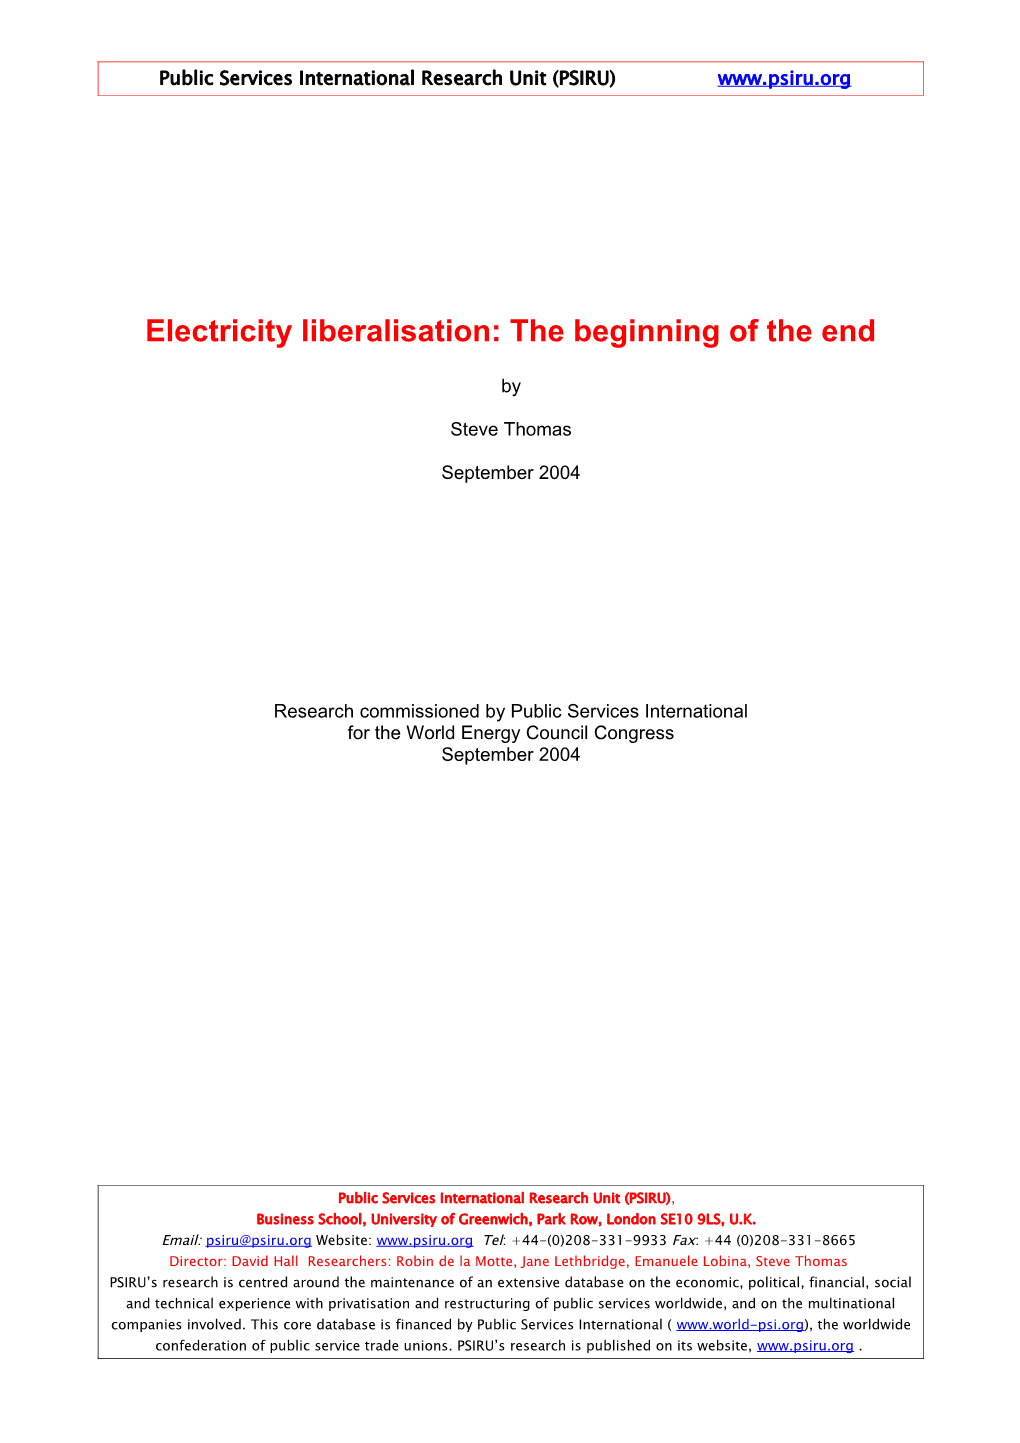 Electricity Liberalisation: the Beginning of the End